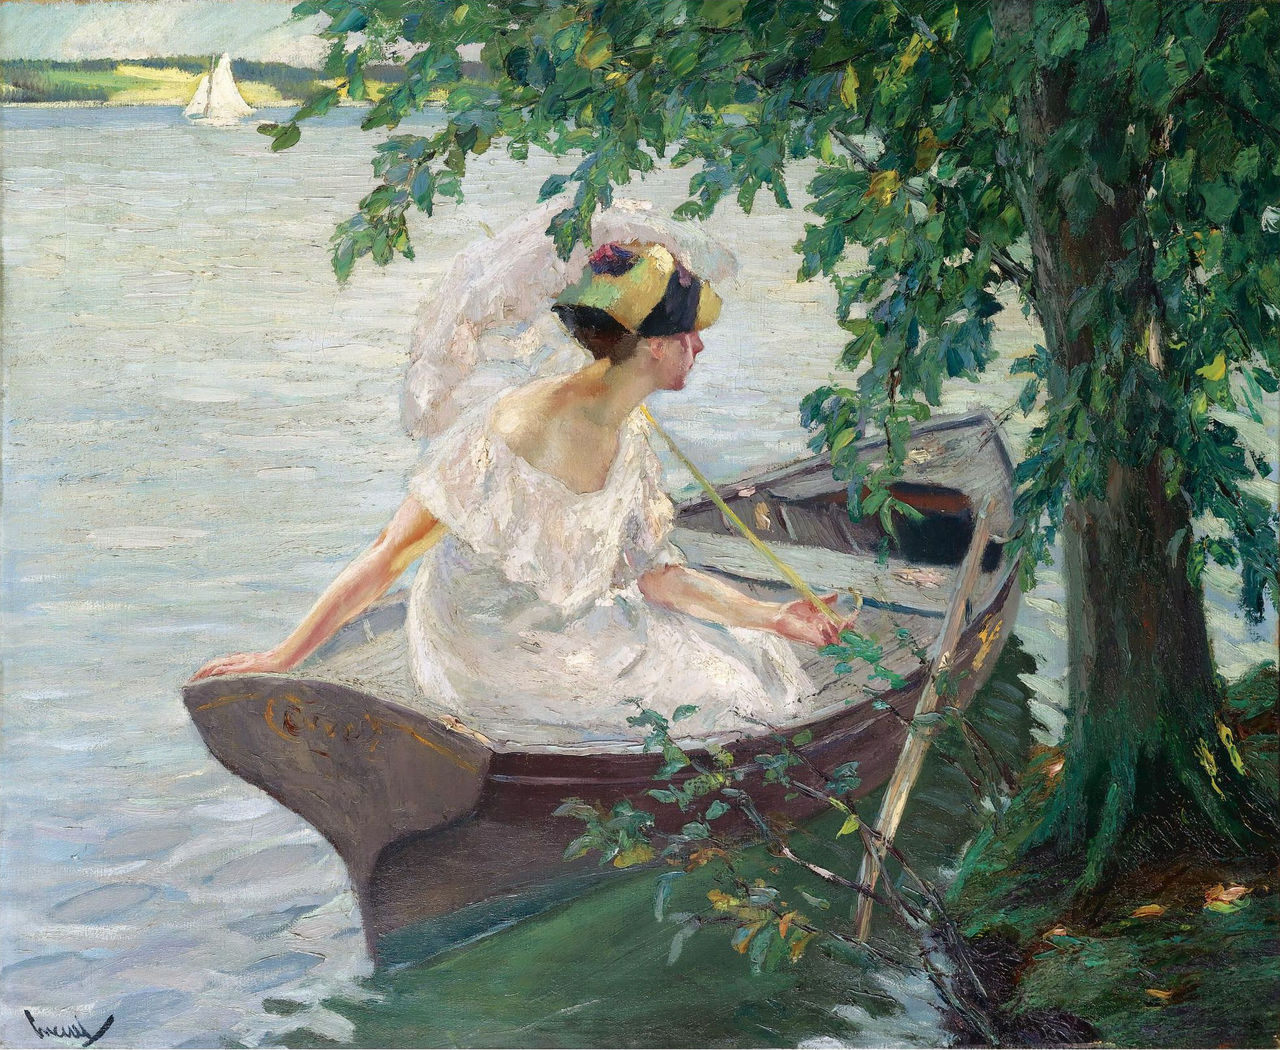 An Outing by Boat - Edward Cucuel - 1917.